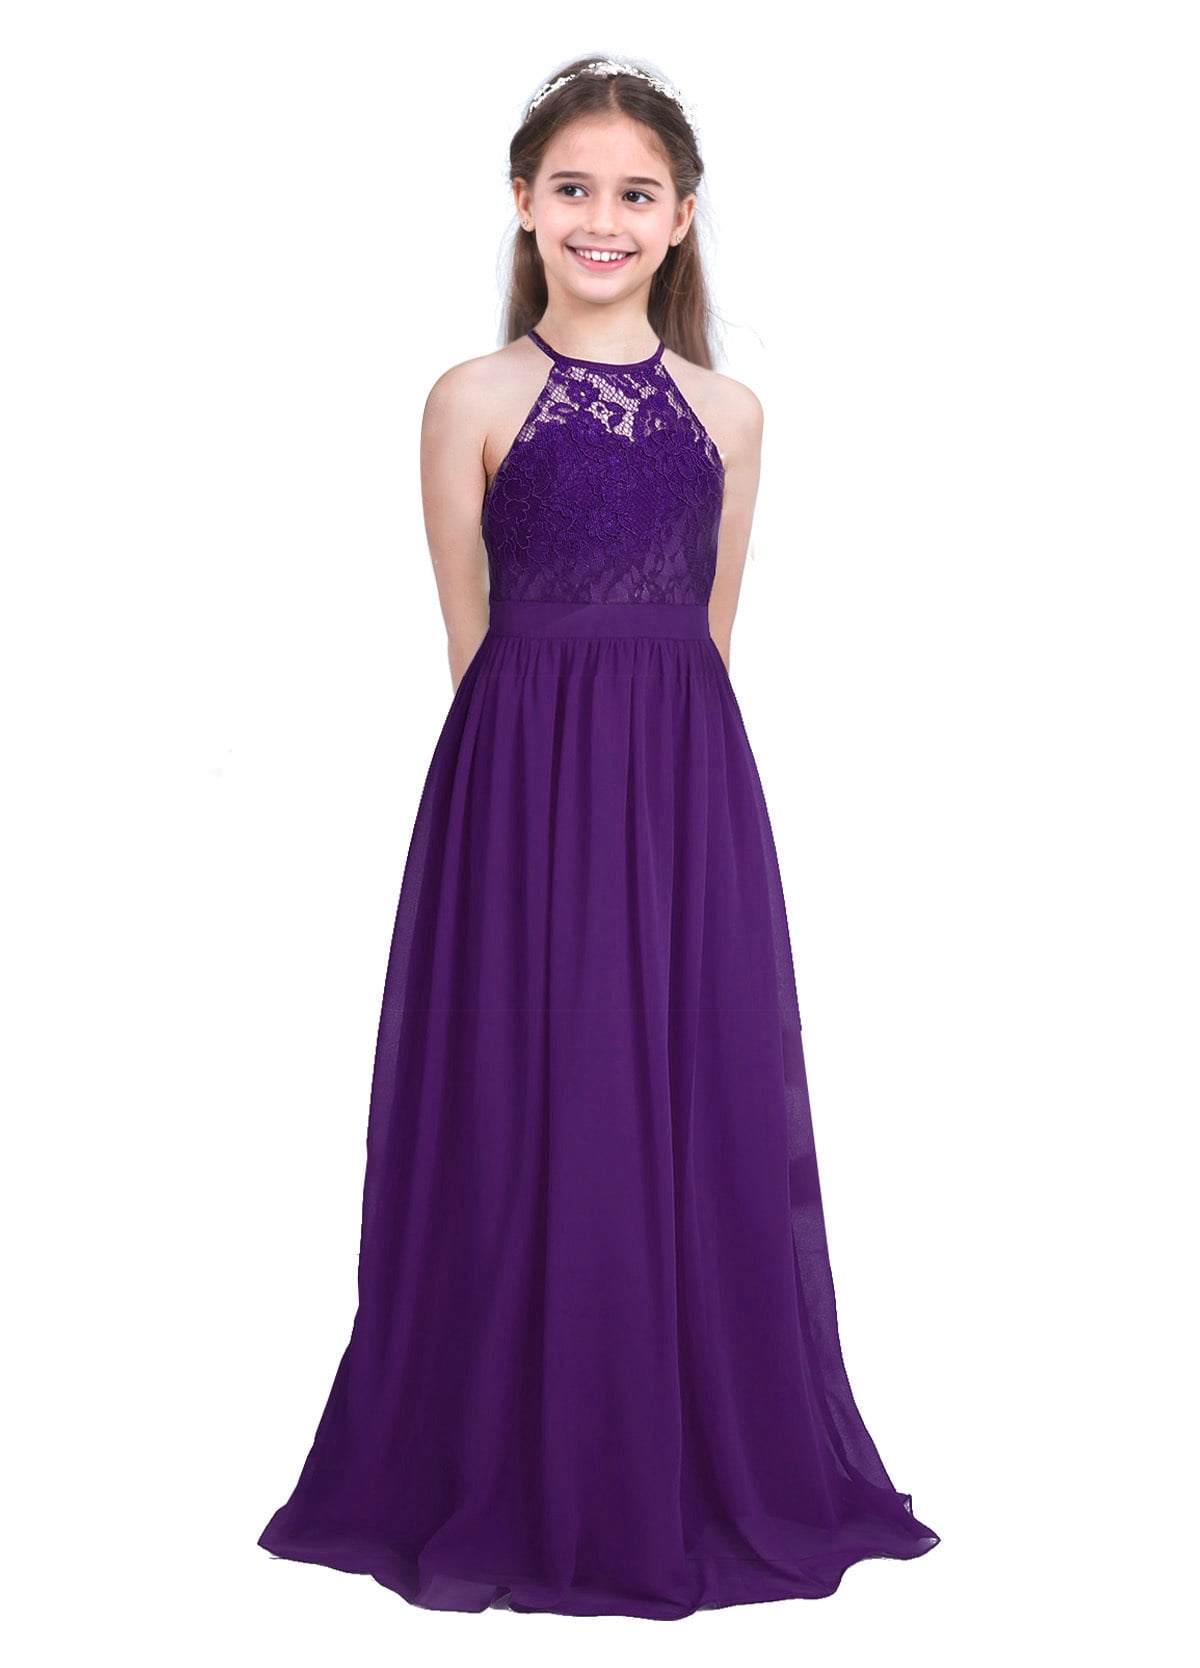 ANGELSBRIDEP Dark Purple Ball Gown Quinceanera Dresses Bling Sequined Lace  Patterned Applique Off Shoulder Prom Party Dress - AliExpress